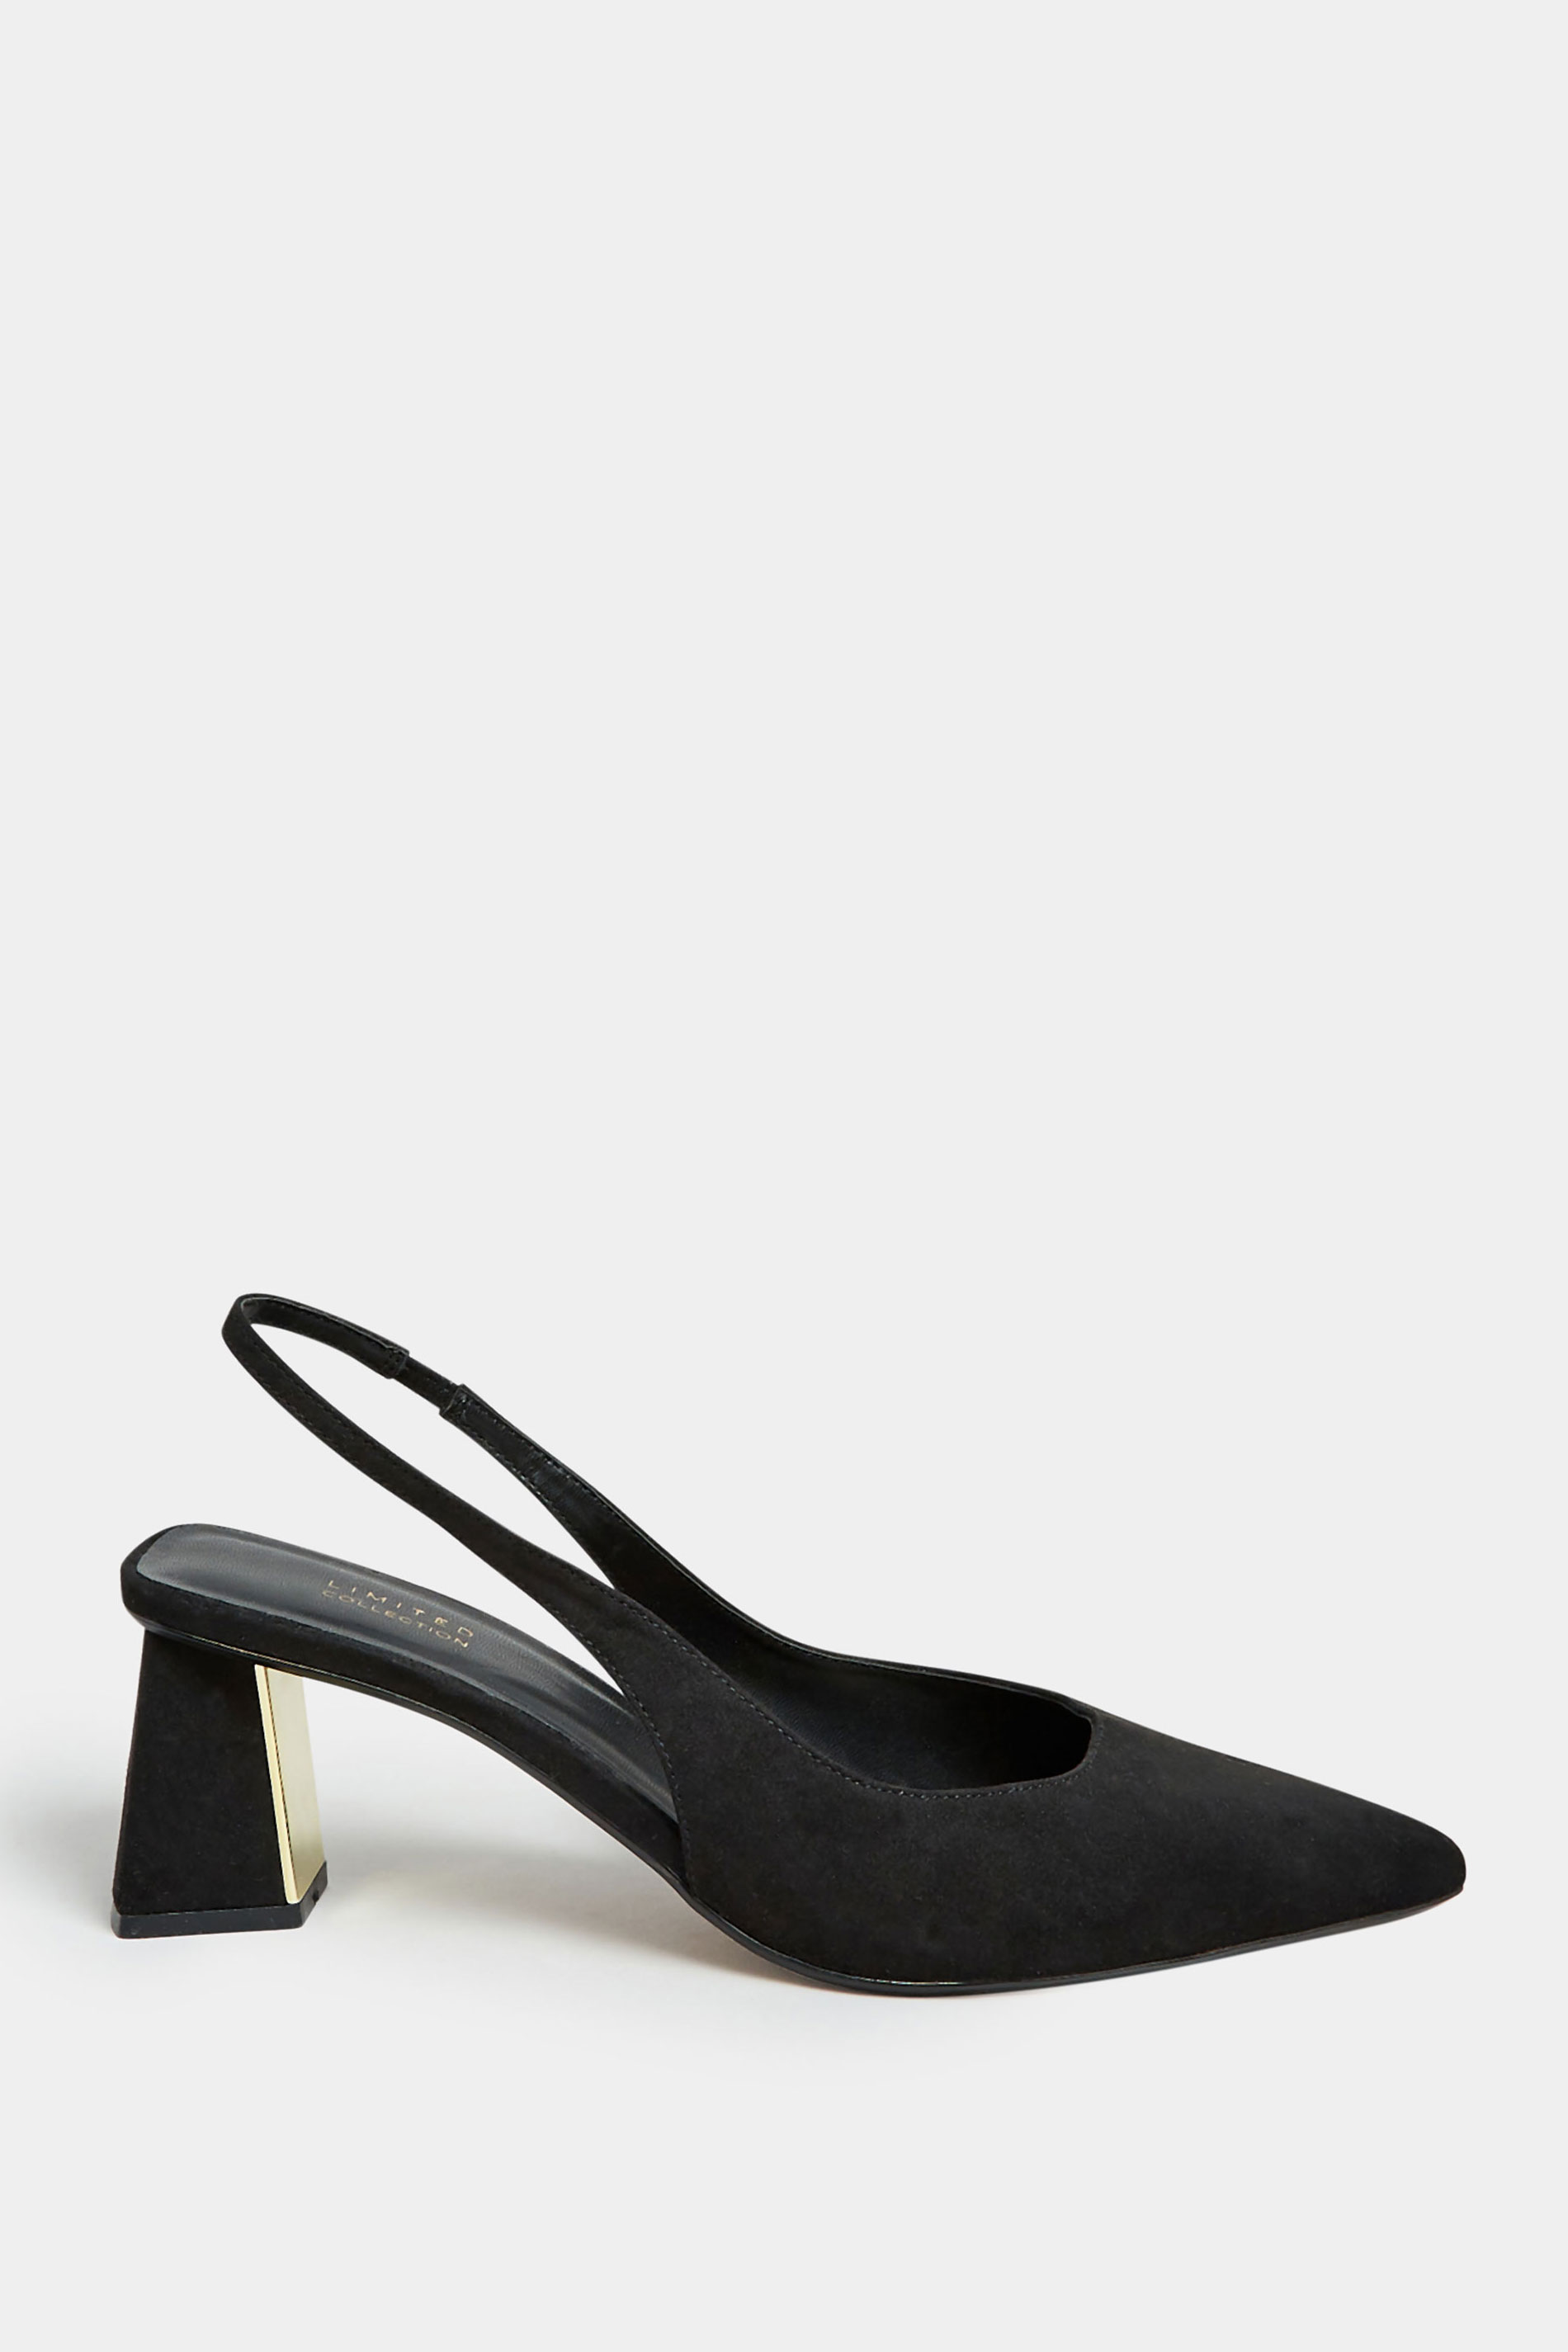 Black Mid Slingback Court Heels In Extra Wide EEE Fit | Yours Clothing  3